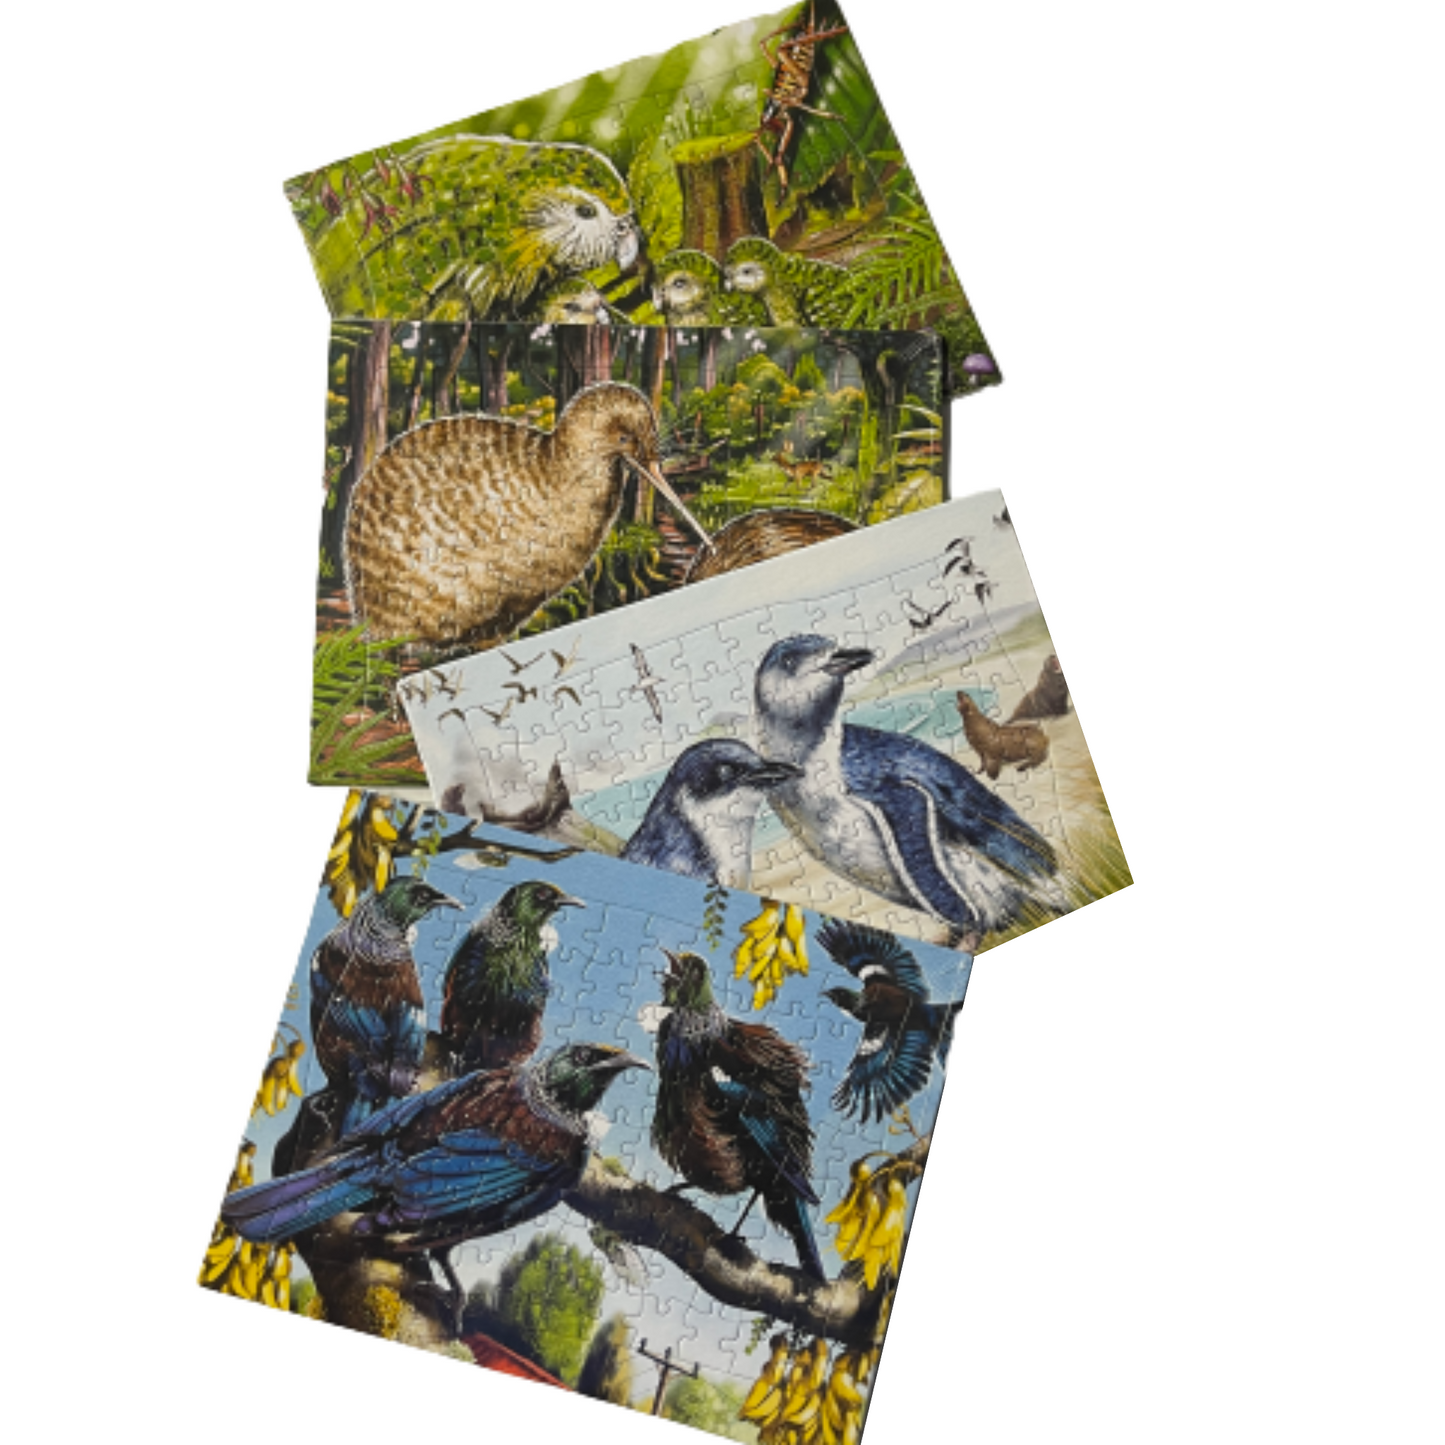 Selection of 4 puzzles each featuring native NZ birds.